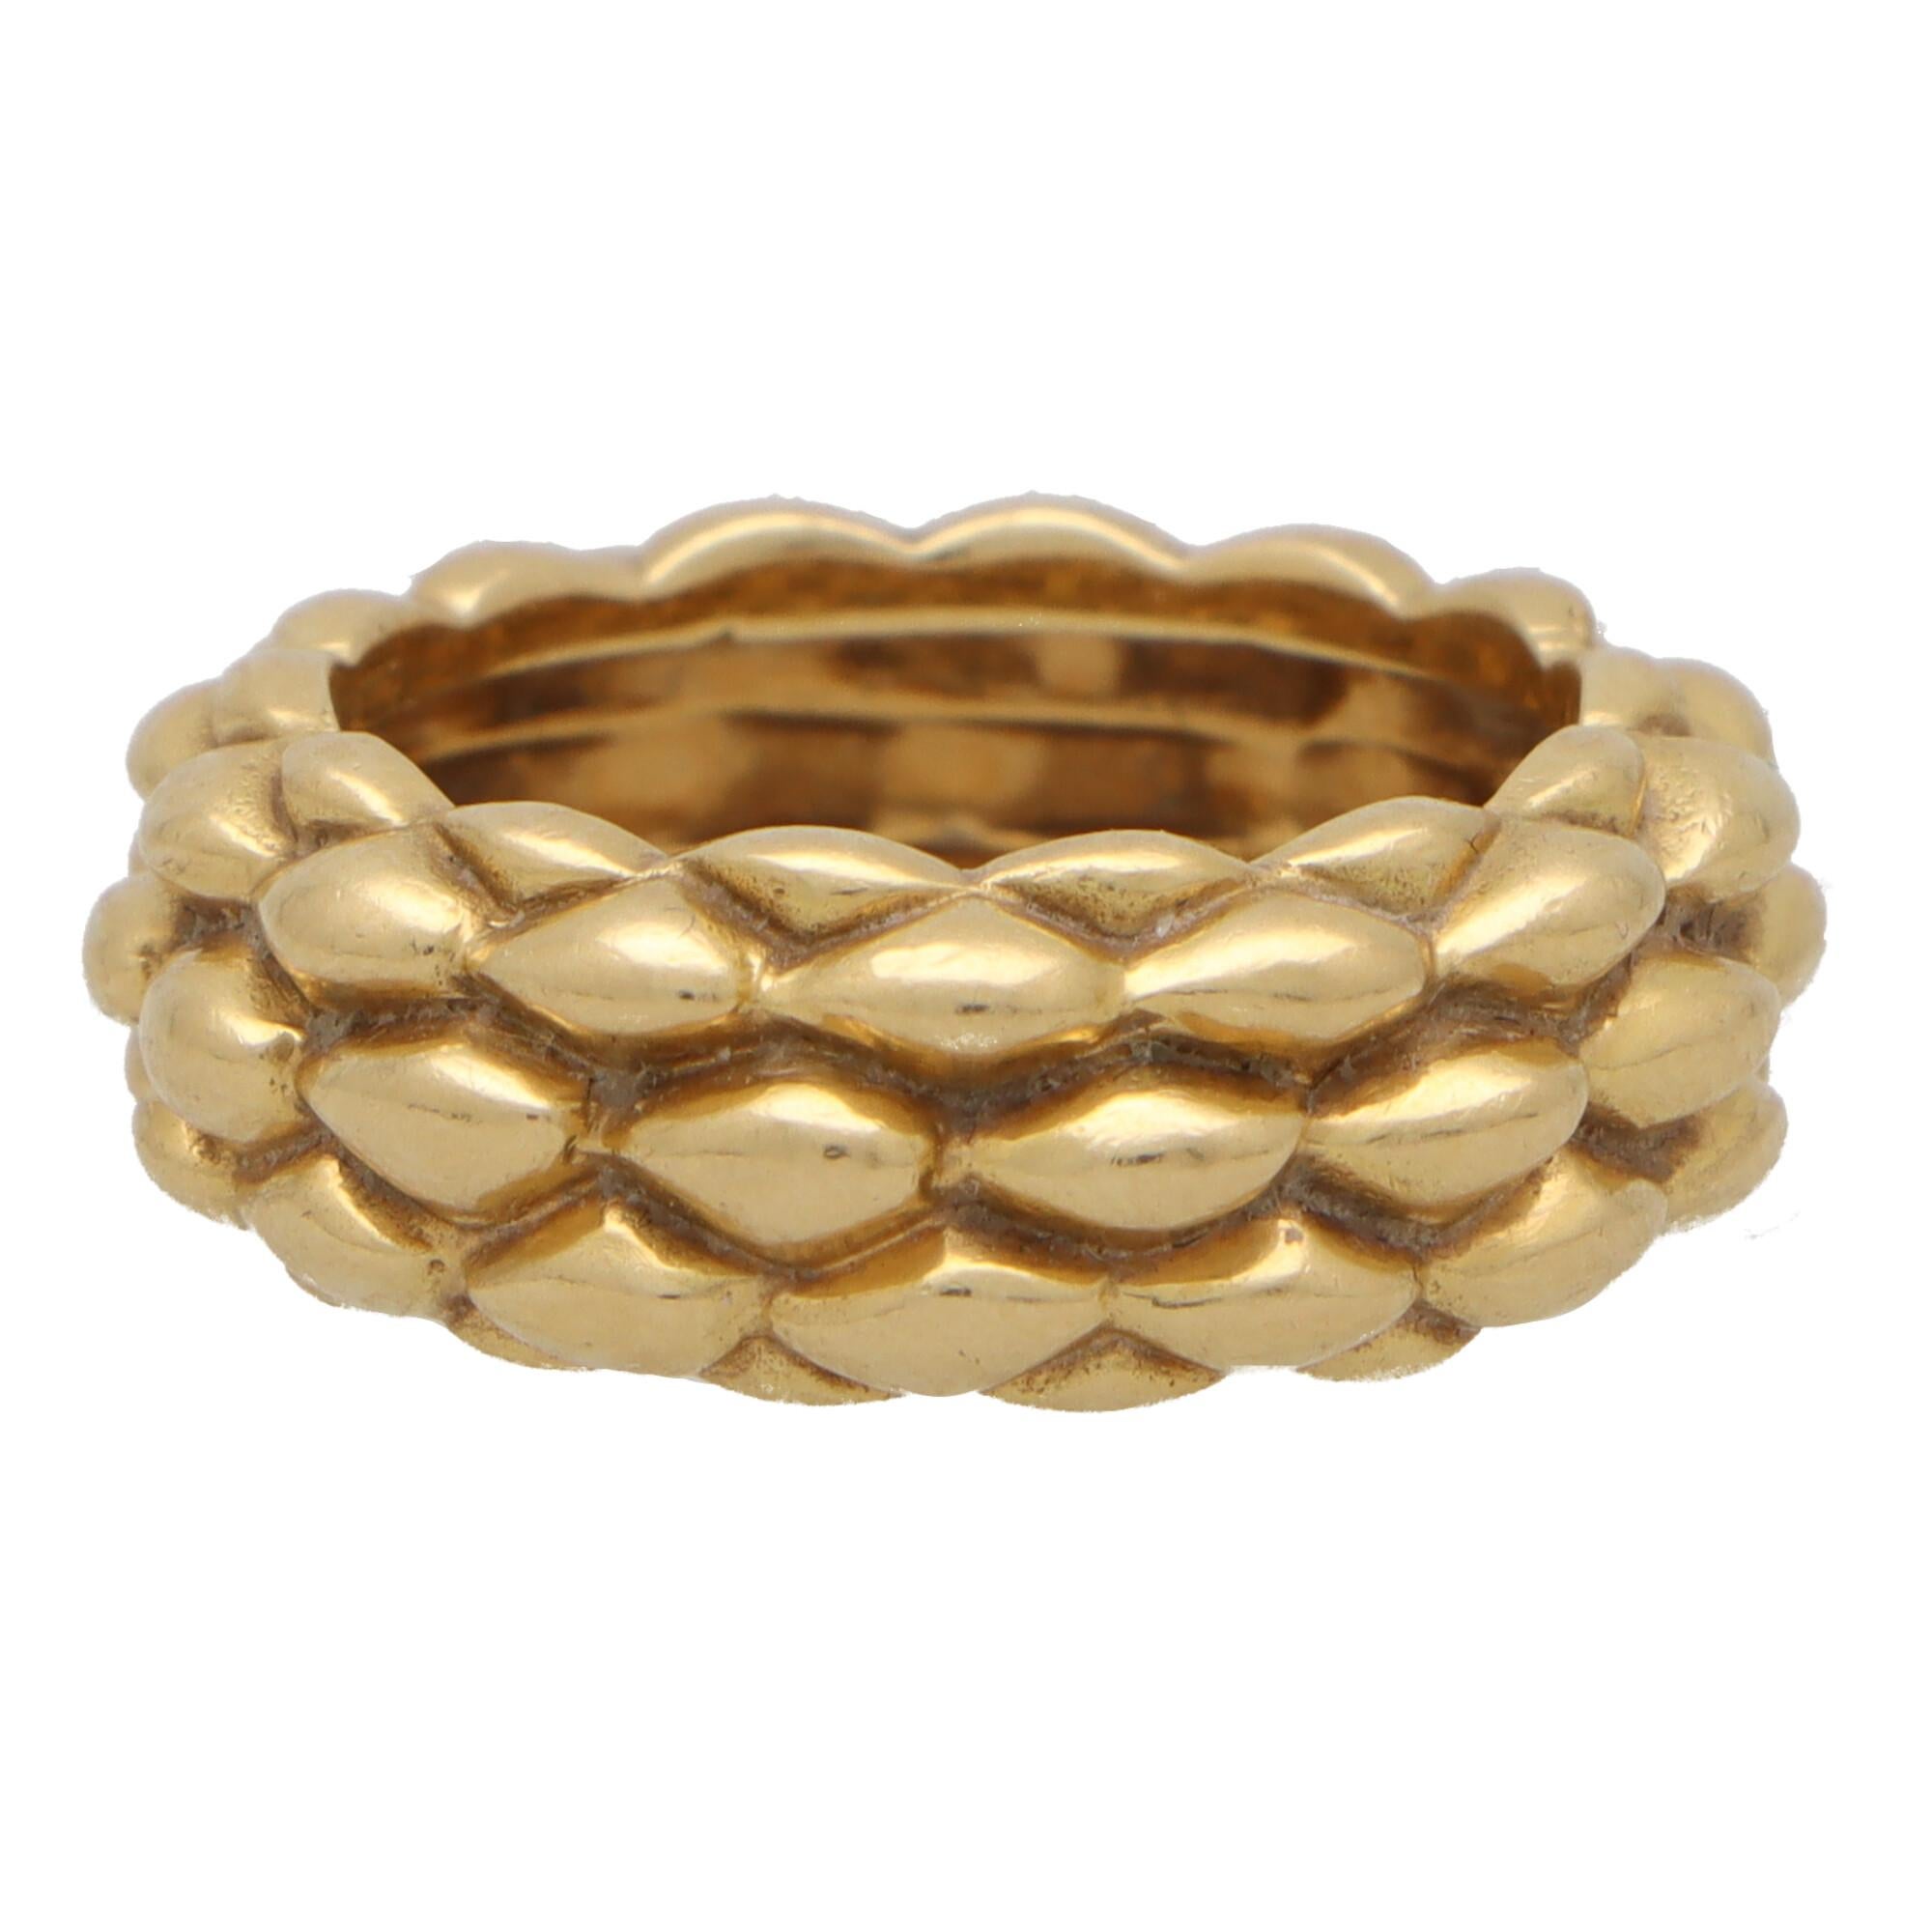 Retro Vintage Chaumet 'Oat' Band Ring Set in 18k Yellow Gold